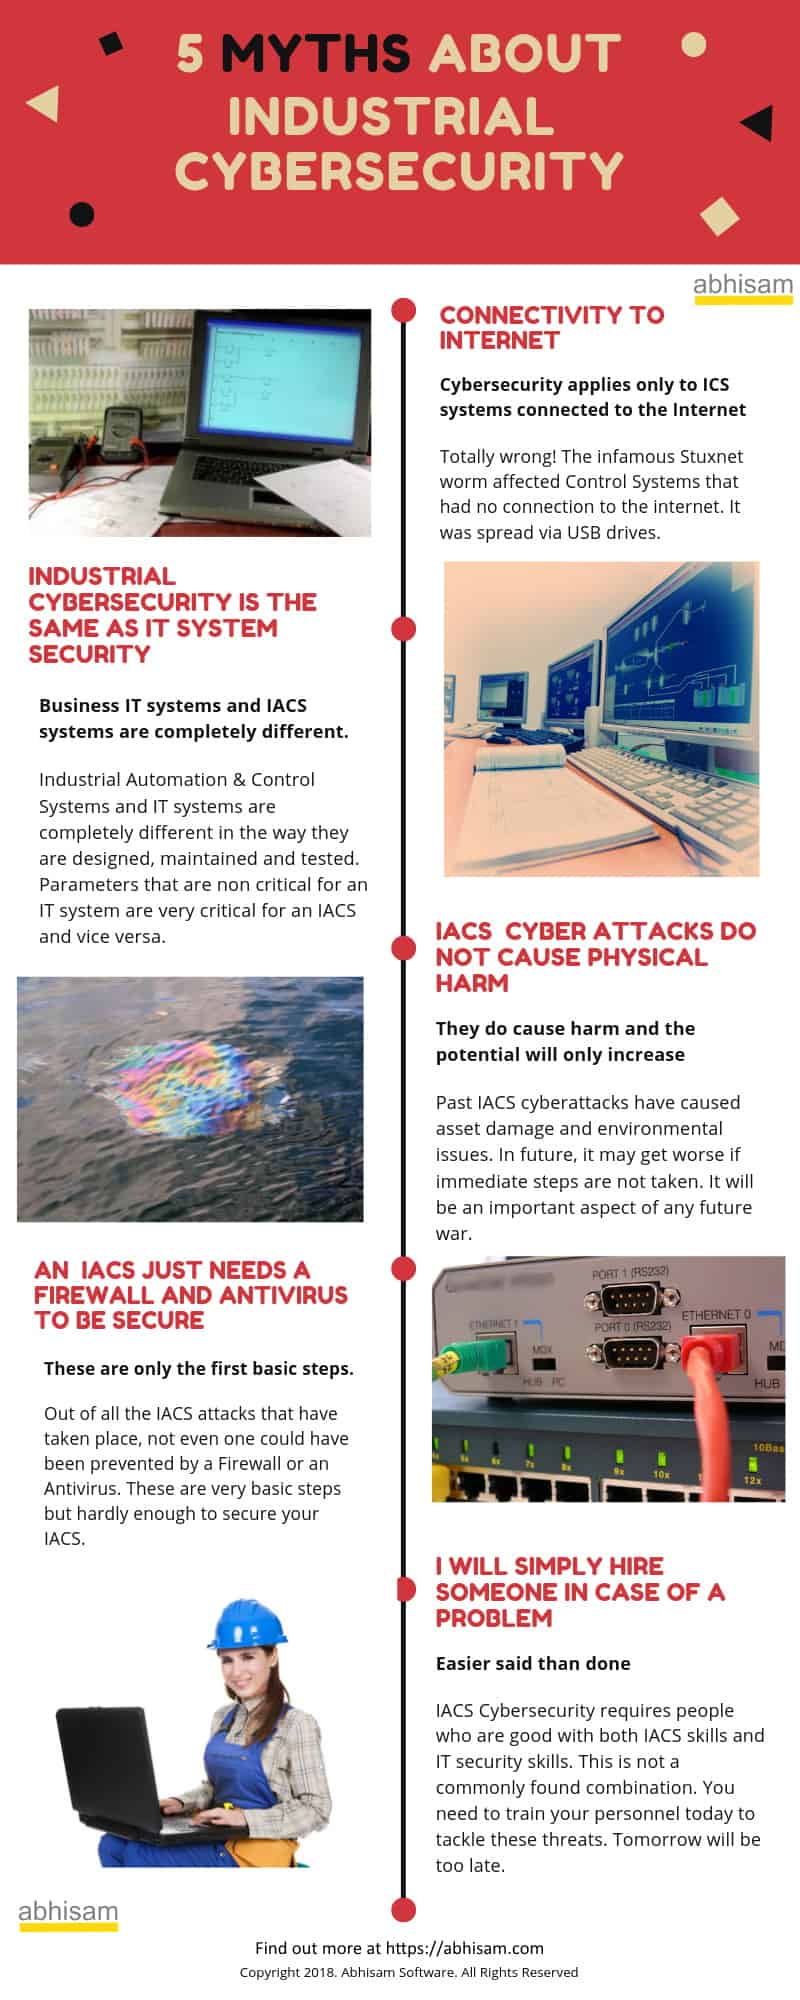 Cybersecurity-Myths-Infographic-by-Abhisam